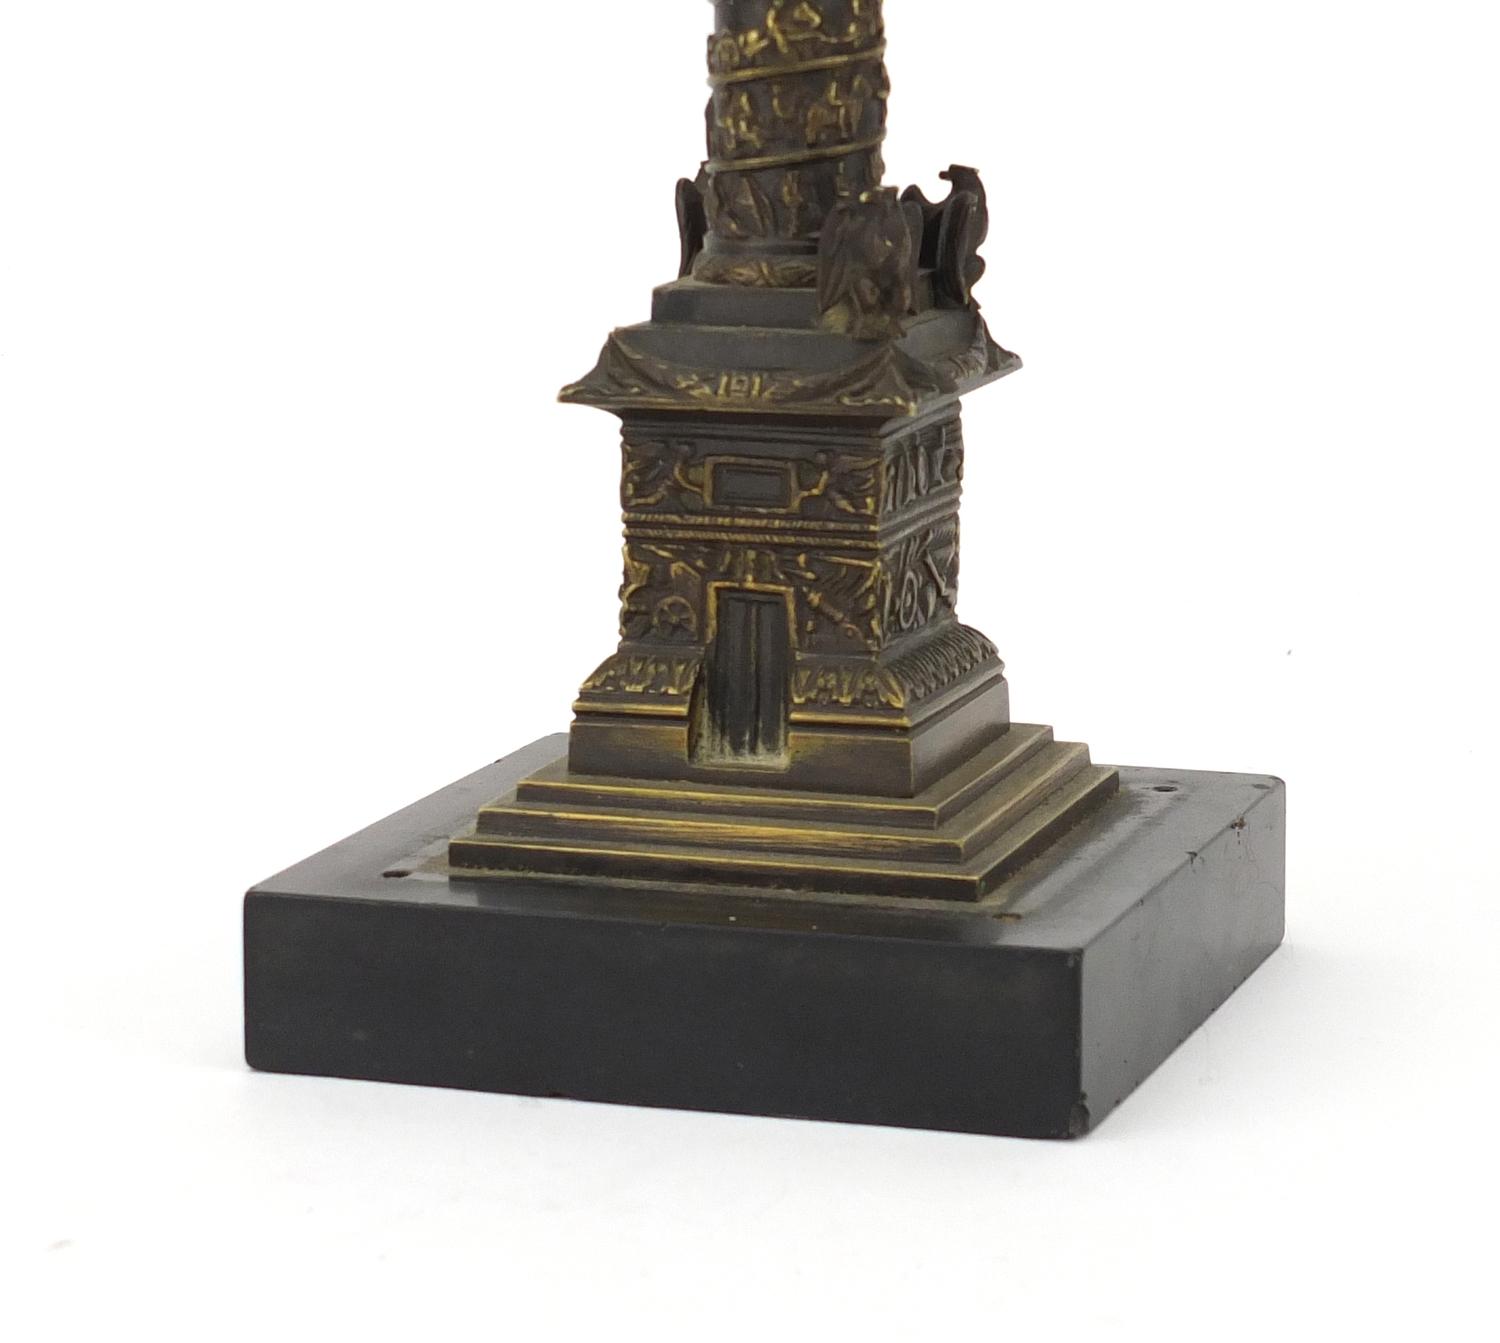 19th century Grand Tour patinated bronze model of Vendome column, raised on a square black slate - Image 4 of 6